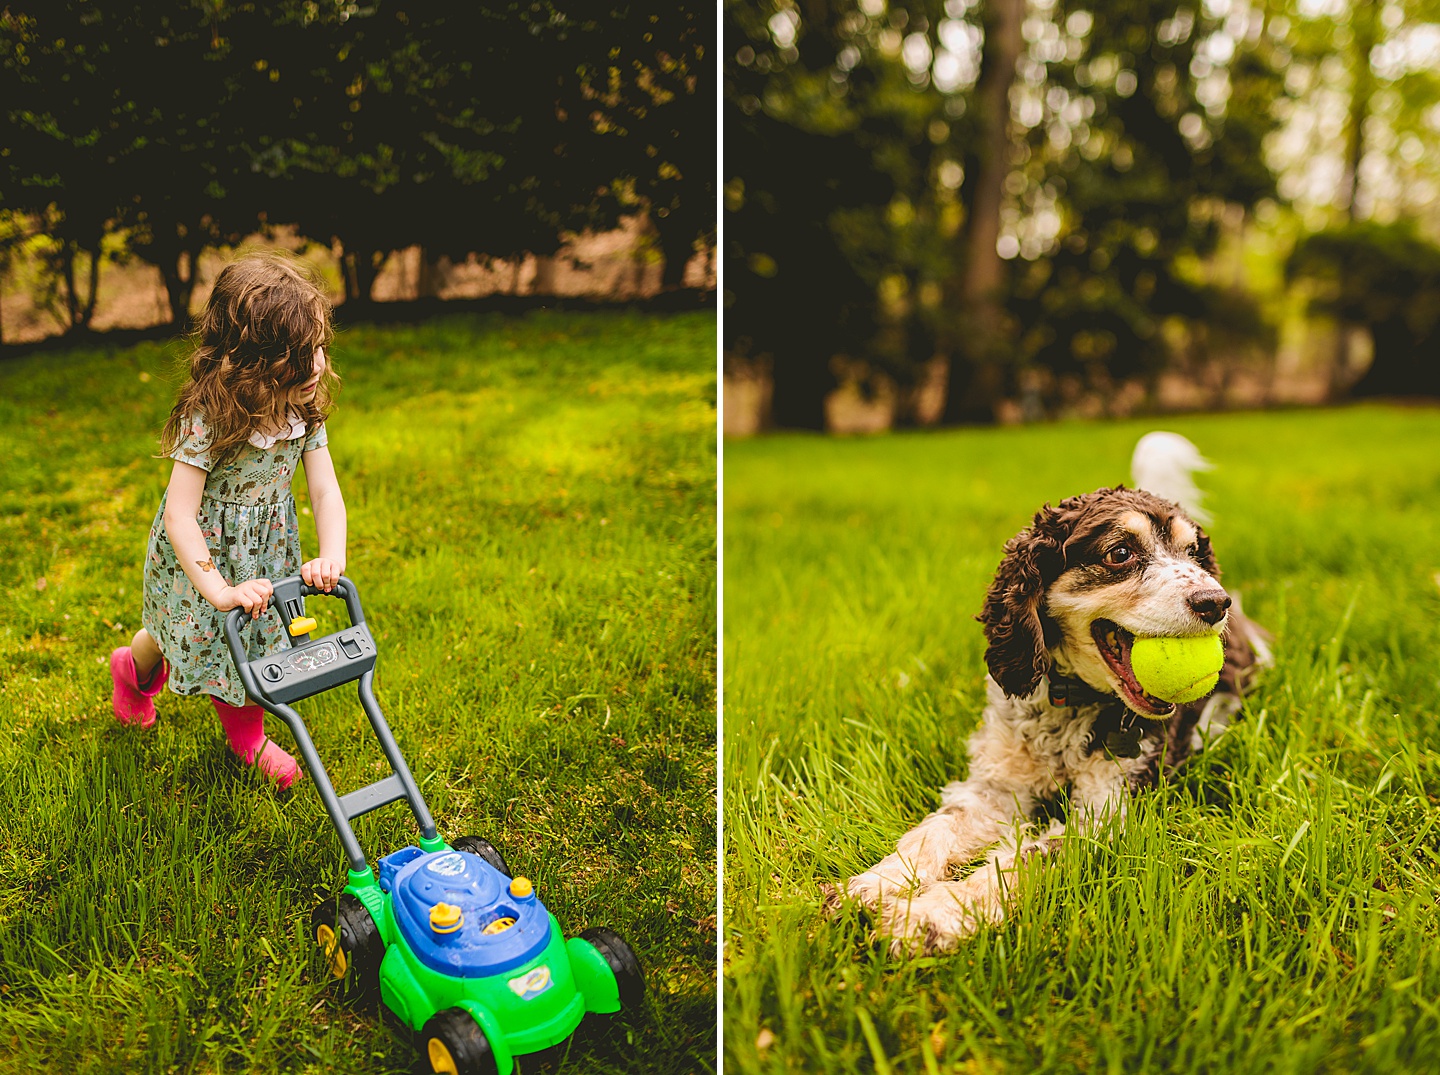 Dog with tennis ball in his mouth and girl with lawnmower